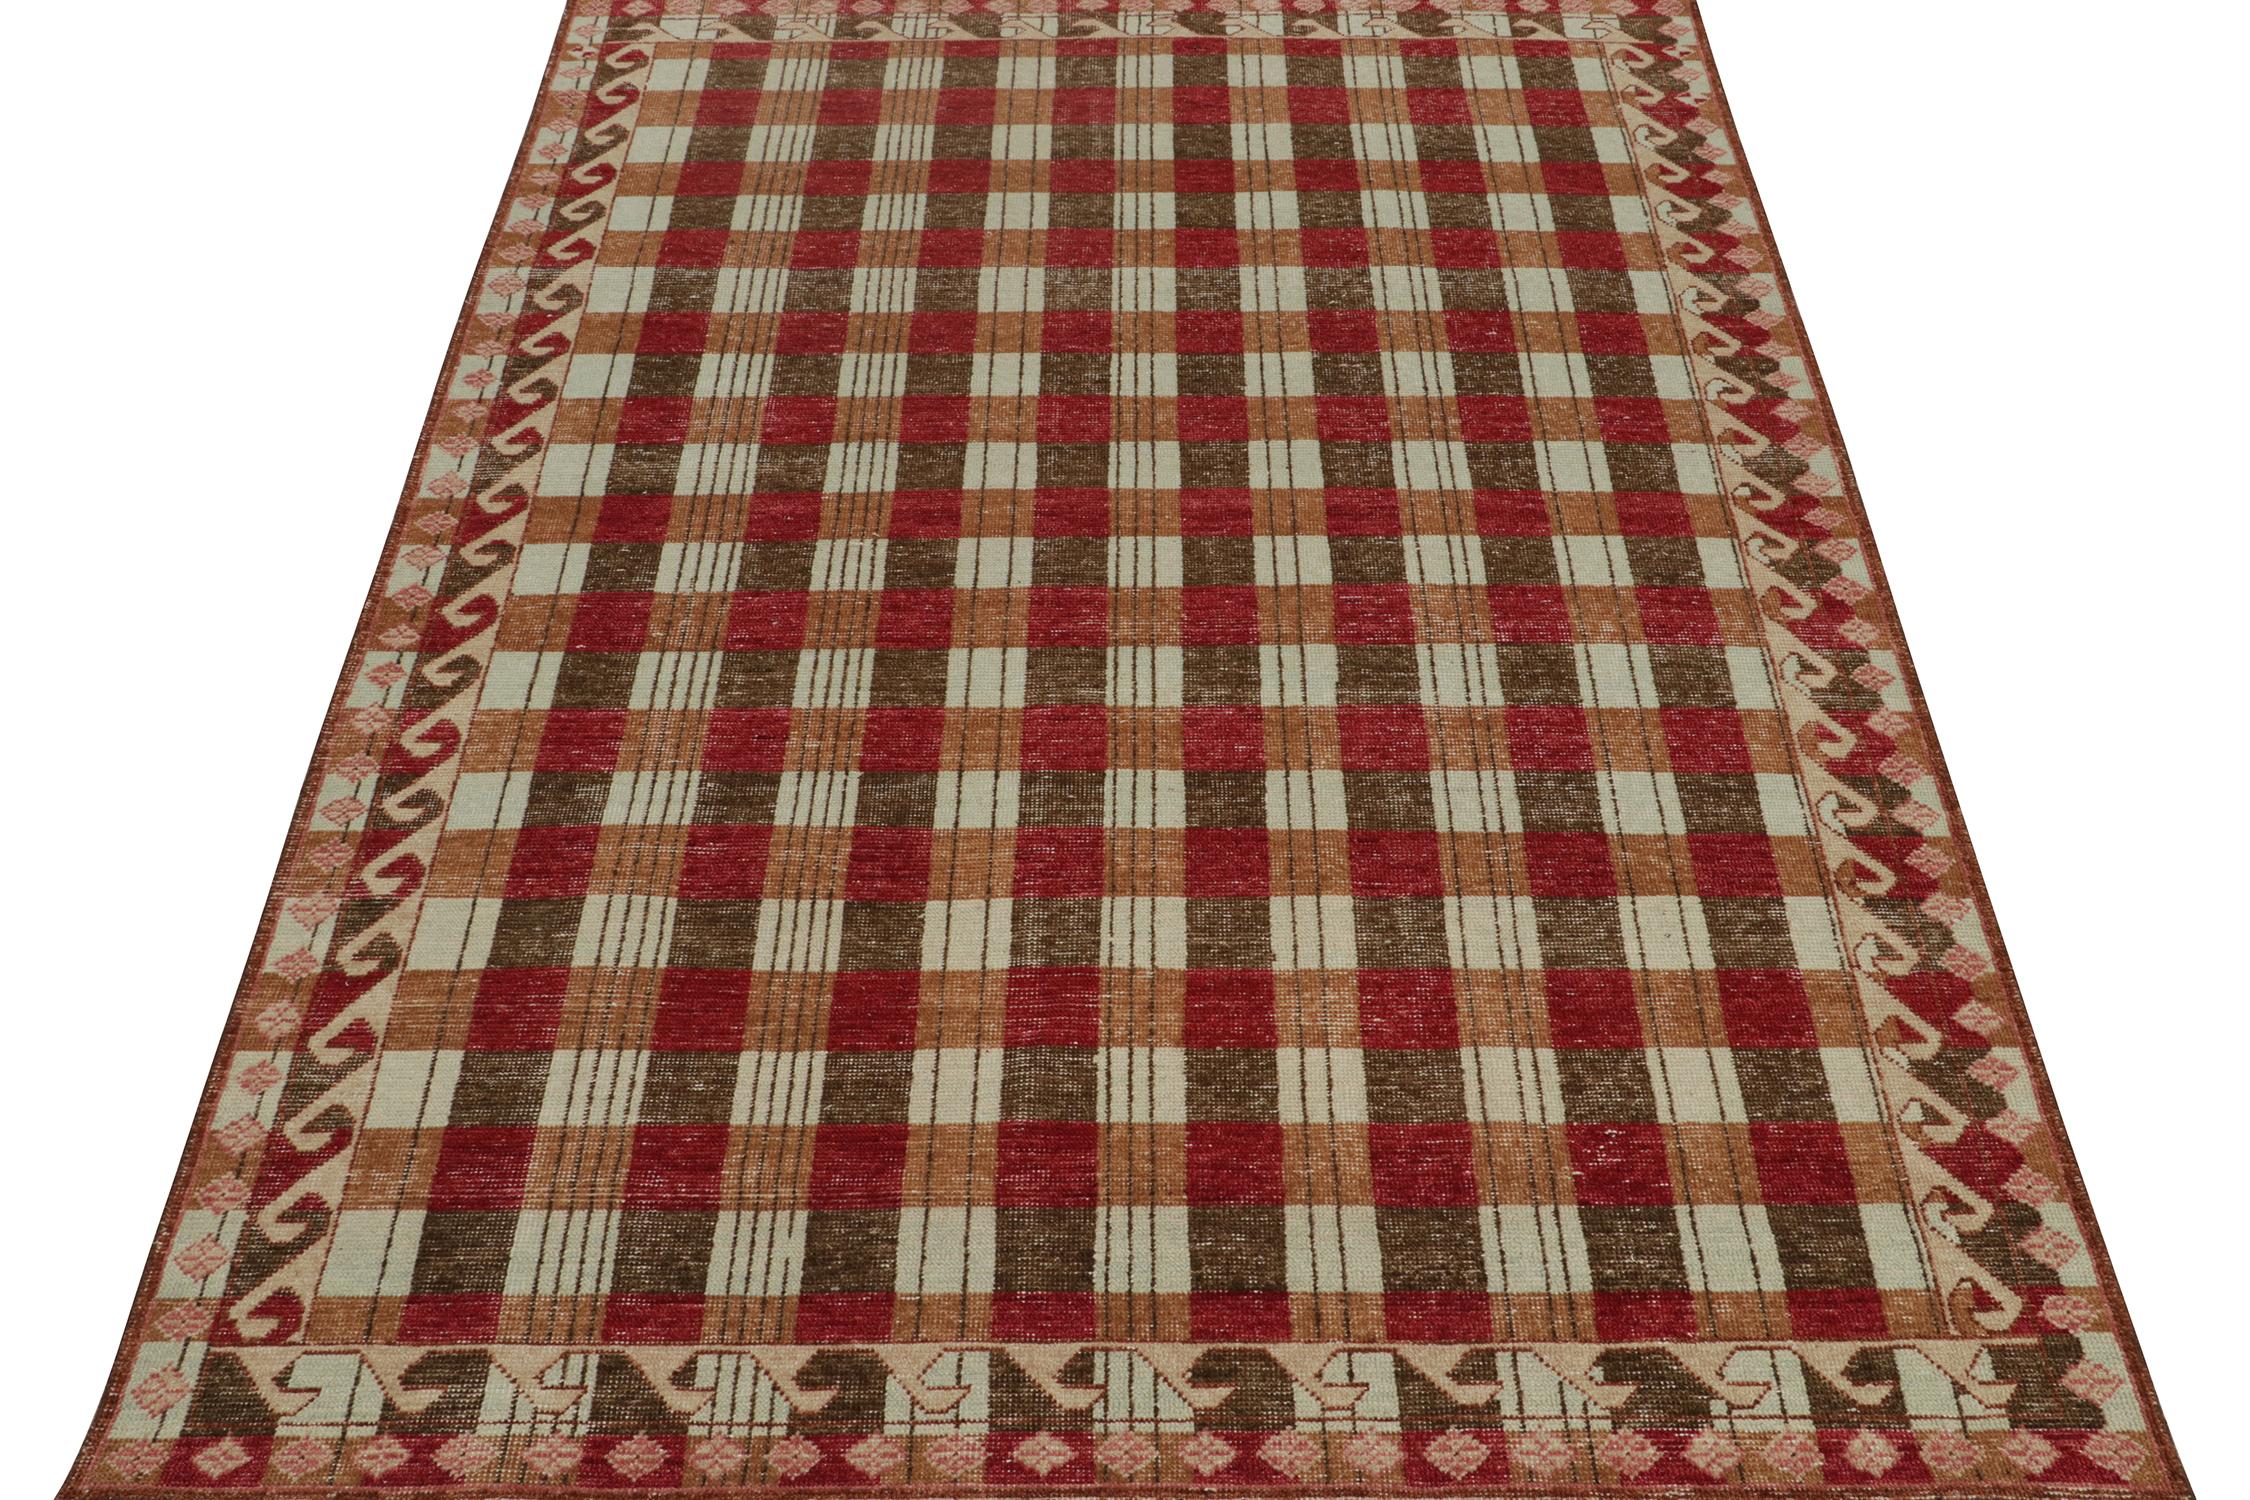 A 6x9 modern rug, hand-knotted in distressed style wool and cotton from Rug & Kilim’s Homage Collection.

Further on the Design:

This design recaptures mid-century Scandinavian rug designs, and favors red and brown geometric patterns with rust and